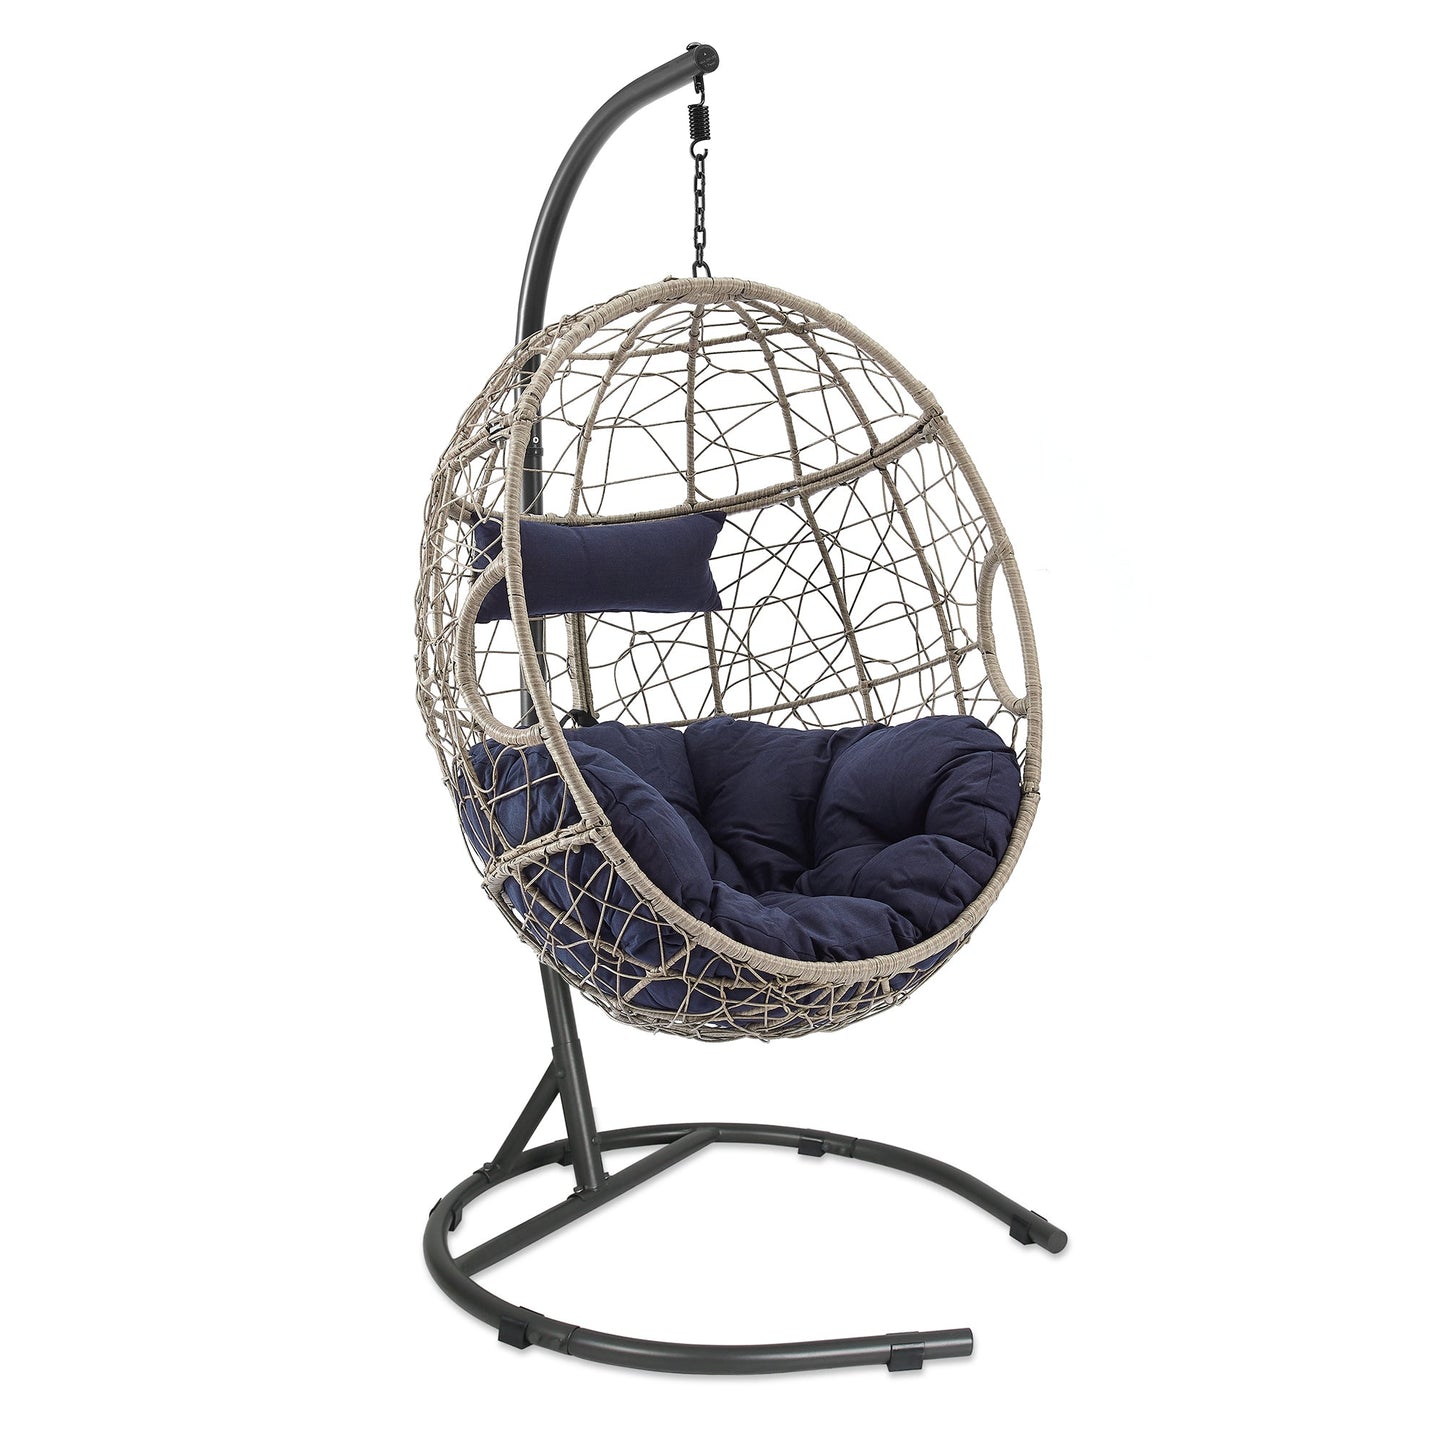 Outdoor Patio Wicker Hanging Basket Swing Chair Drop Egg Chair with Cushion and Stand (Navy)